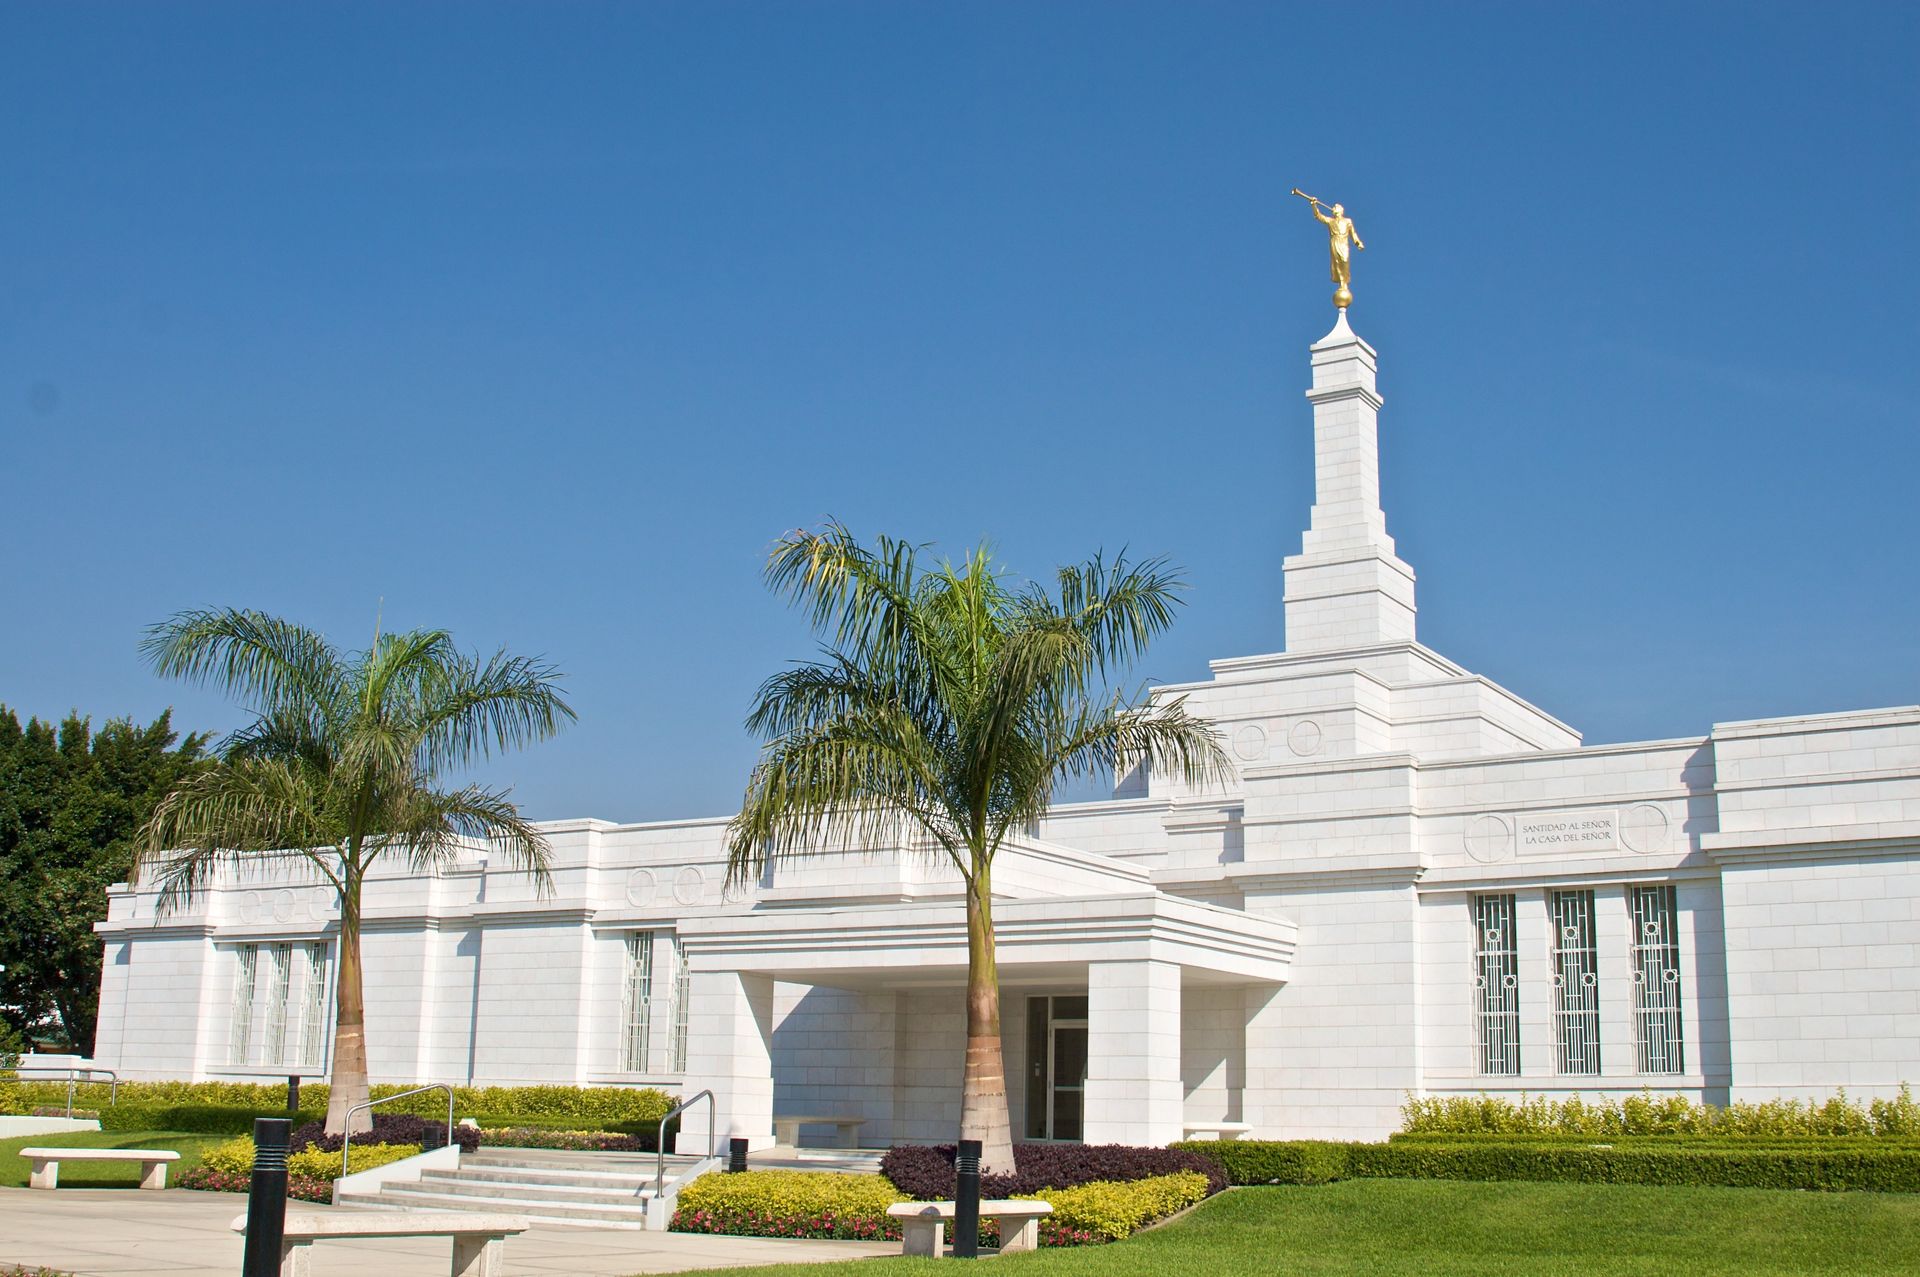 The Oaxaca Mexico Temple entrance, including scenery and the exterior of the temple.